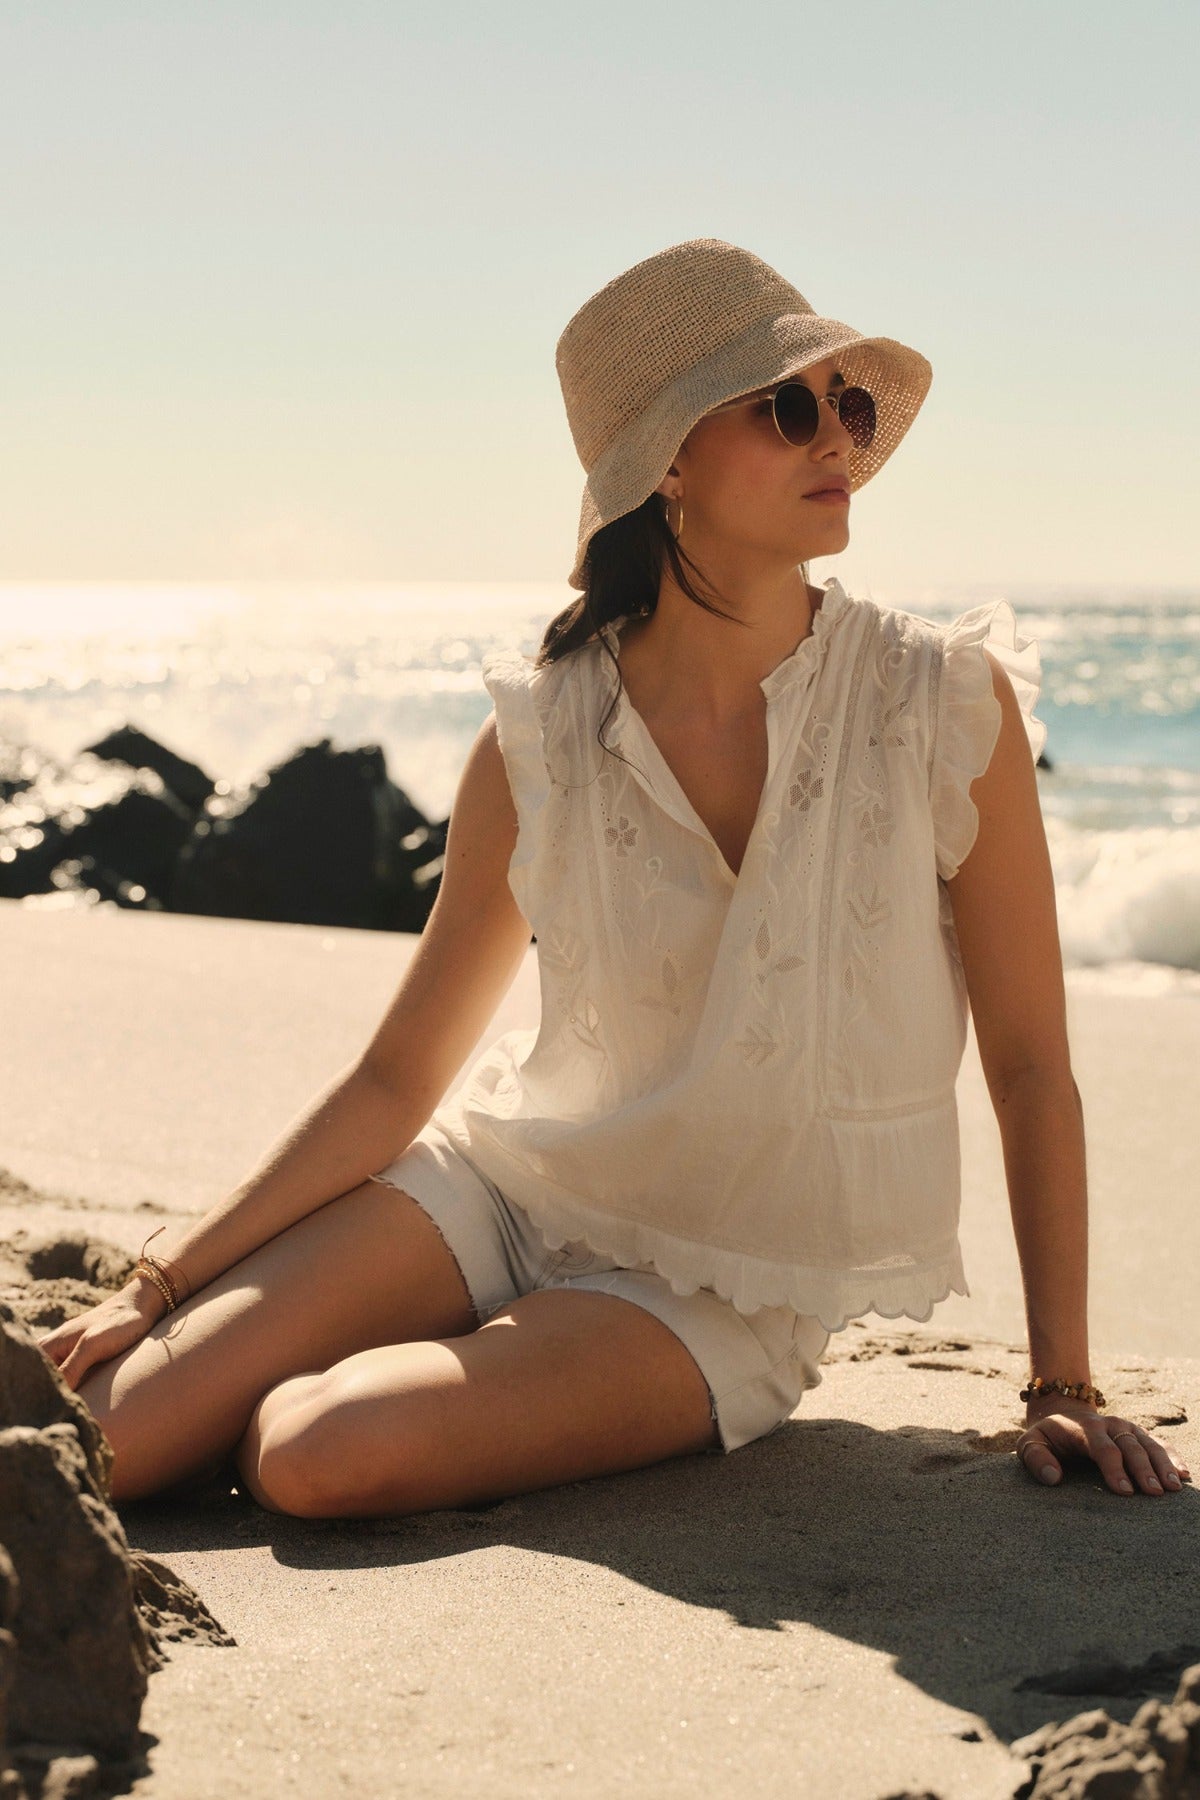 Woman in a white CHARLENE TOP by Velvet by Graham & Spencer embroidery outfit and sunhat sitting on a beach with rocks, looking away from the camera, ocean in the background.-36752743465153